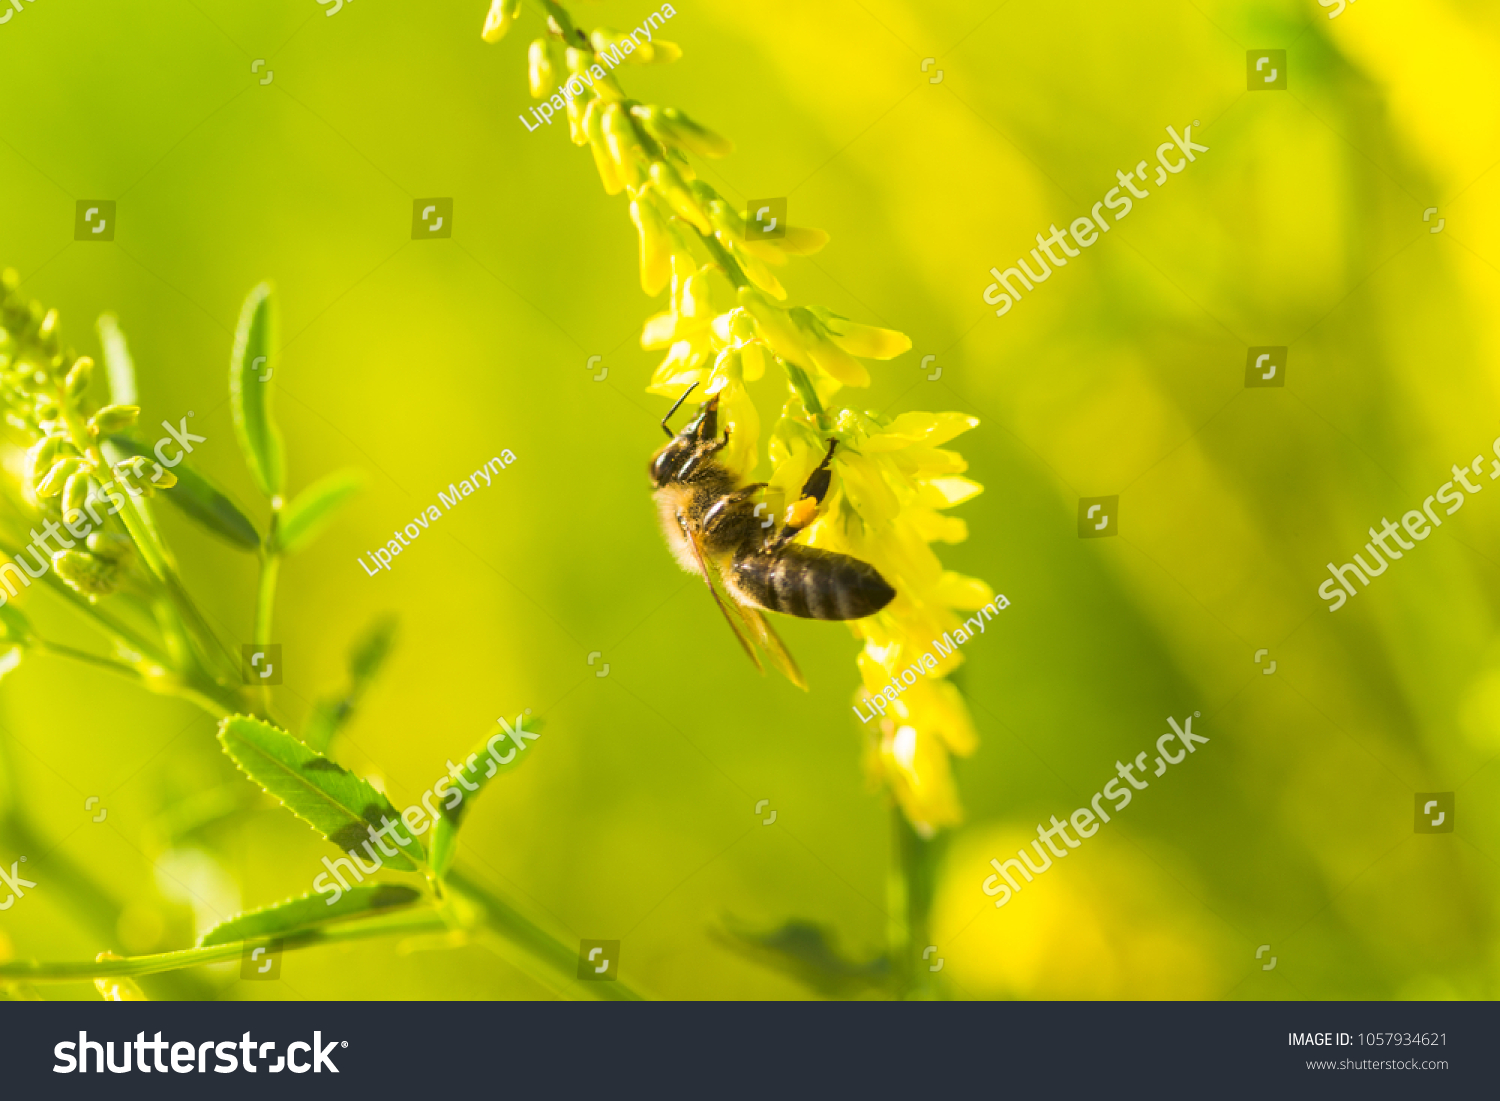 honey-laiden bee with the yellow pollen on foot collects the nectar from the flower Melilotus officinalis, yellow sweet clover, yellow melilot, ribbed melilot, common melilot #1057934621